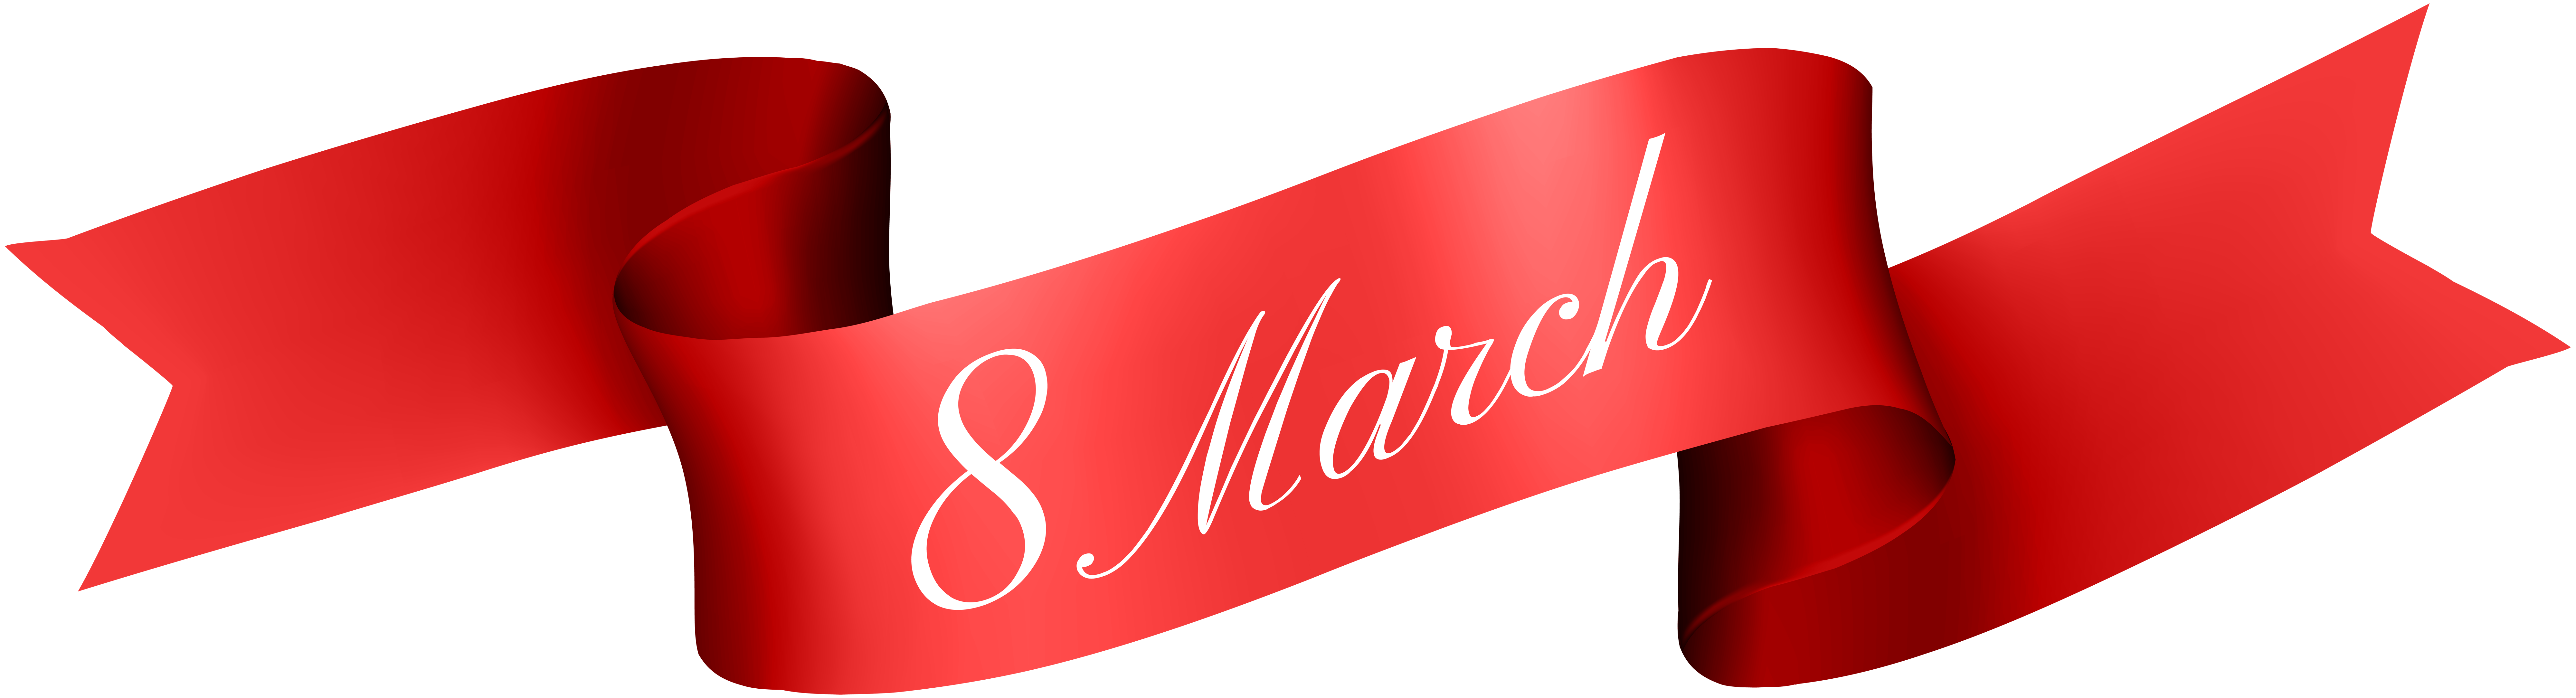 clipart banner march